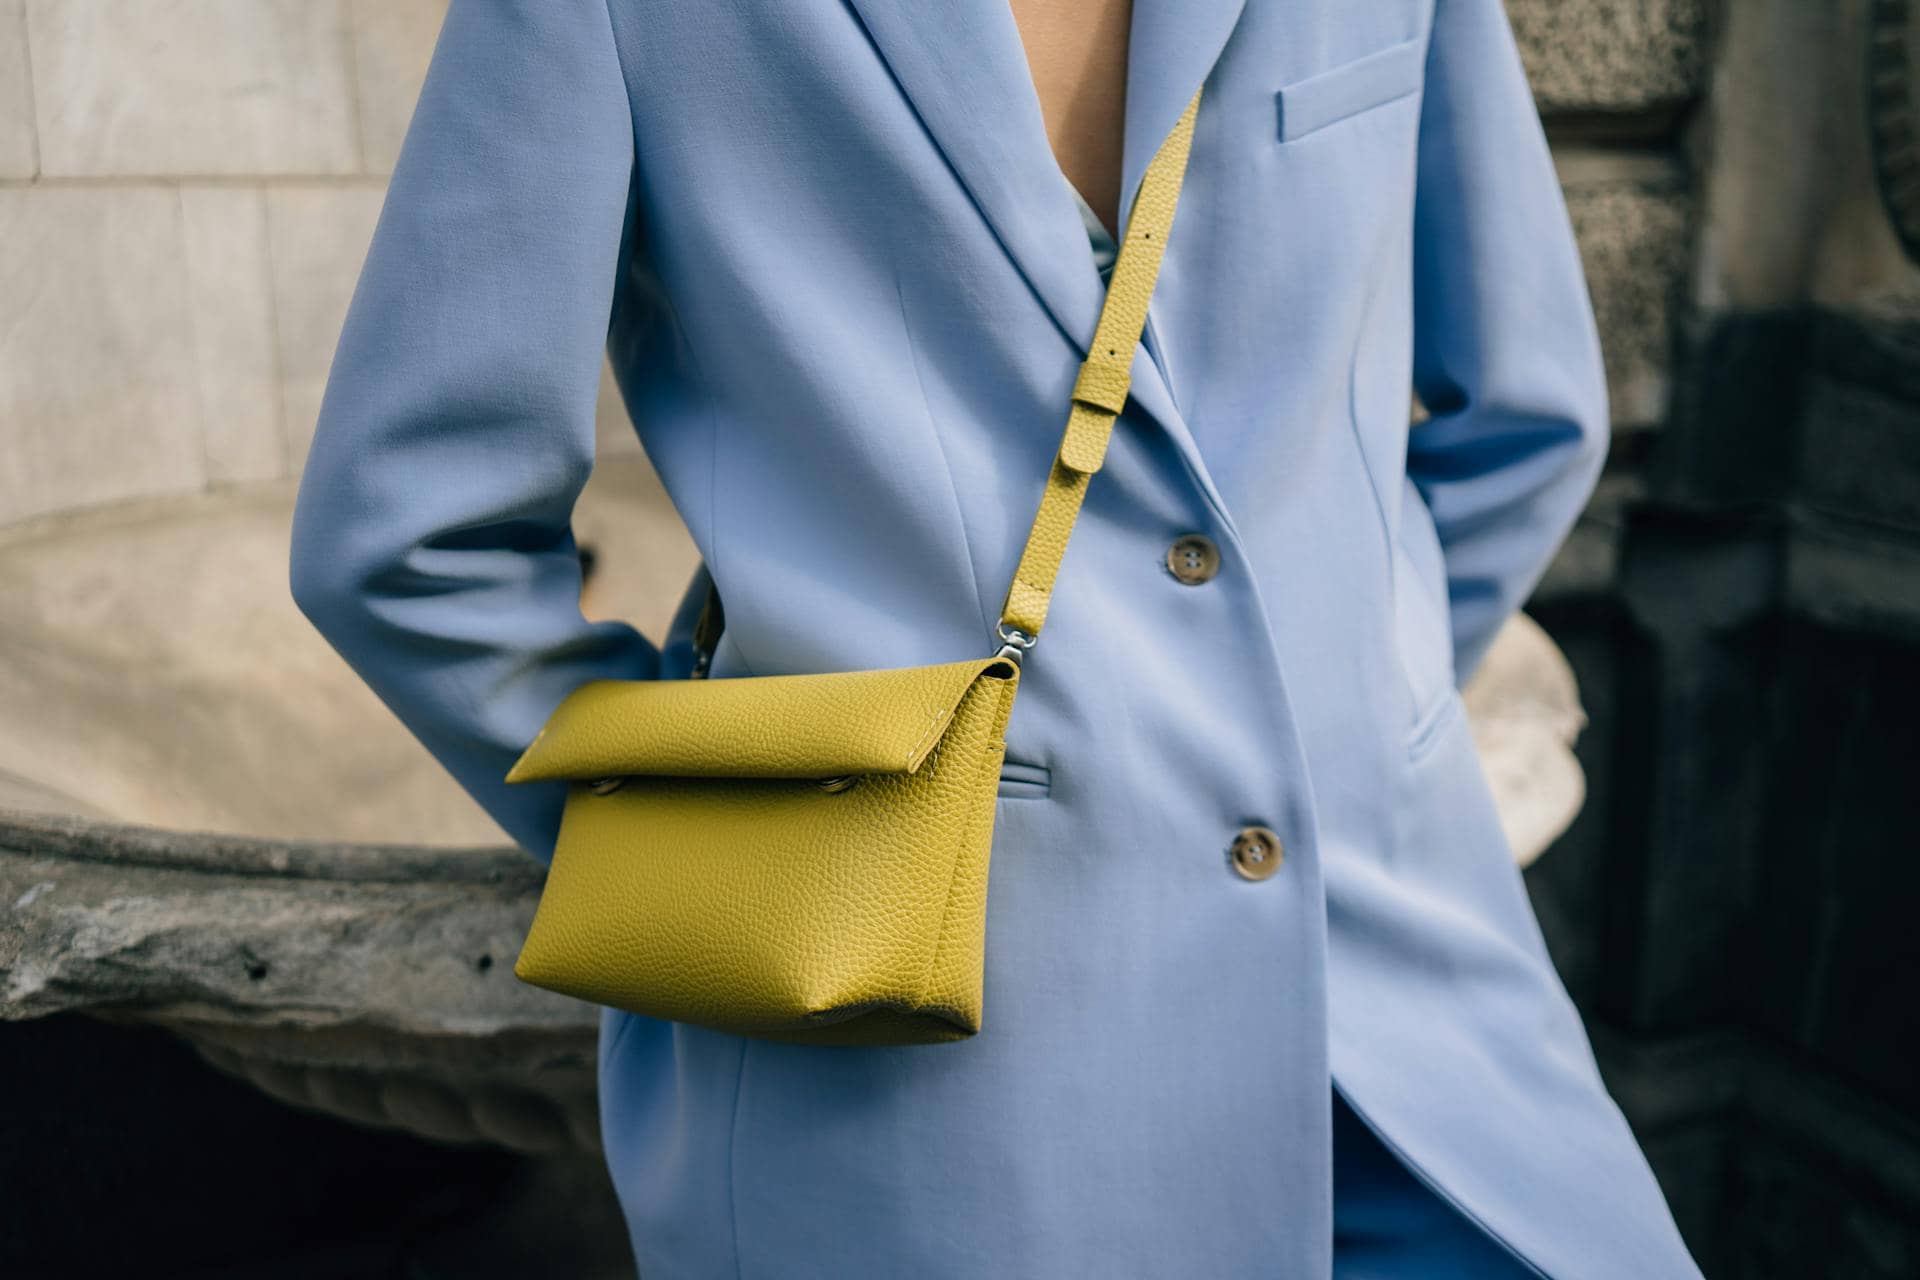 The Ultimate Style Statement: How Sling Bags are Redefining Fashion